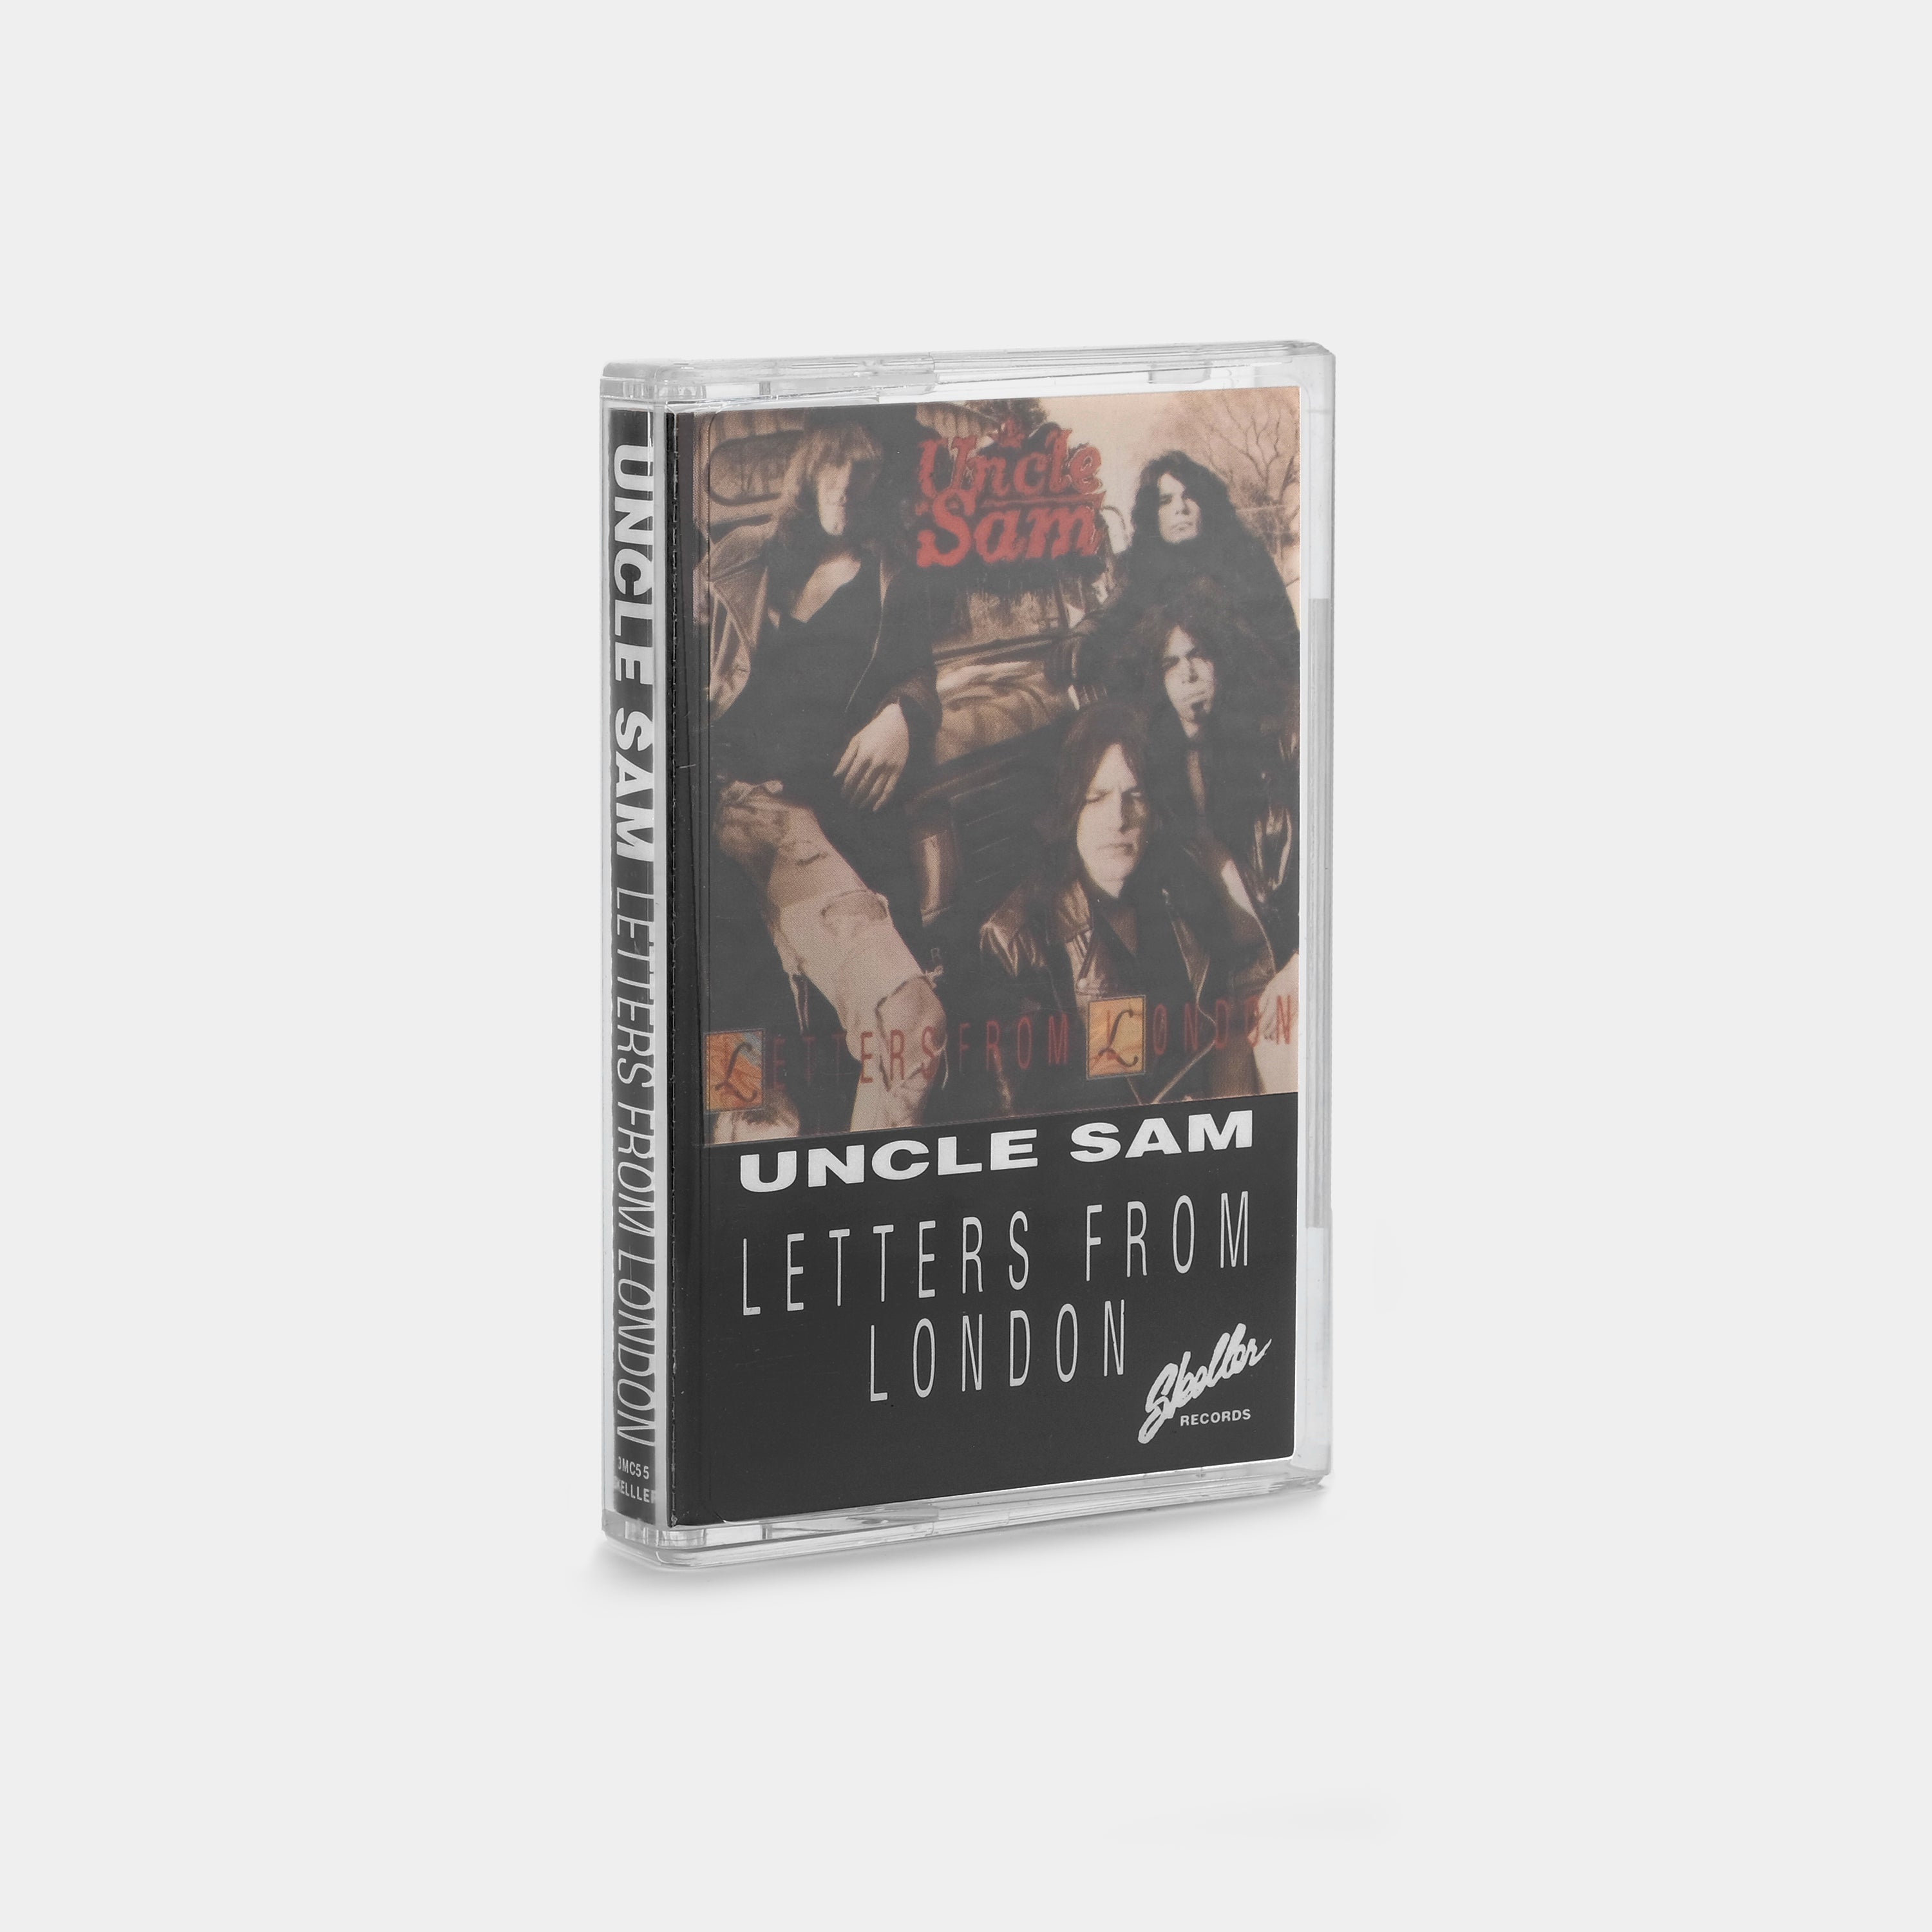 Uncle Sam - Letters From London Cassette Tape